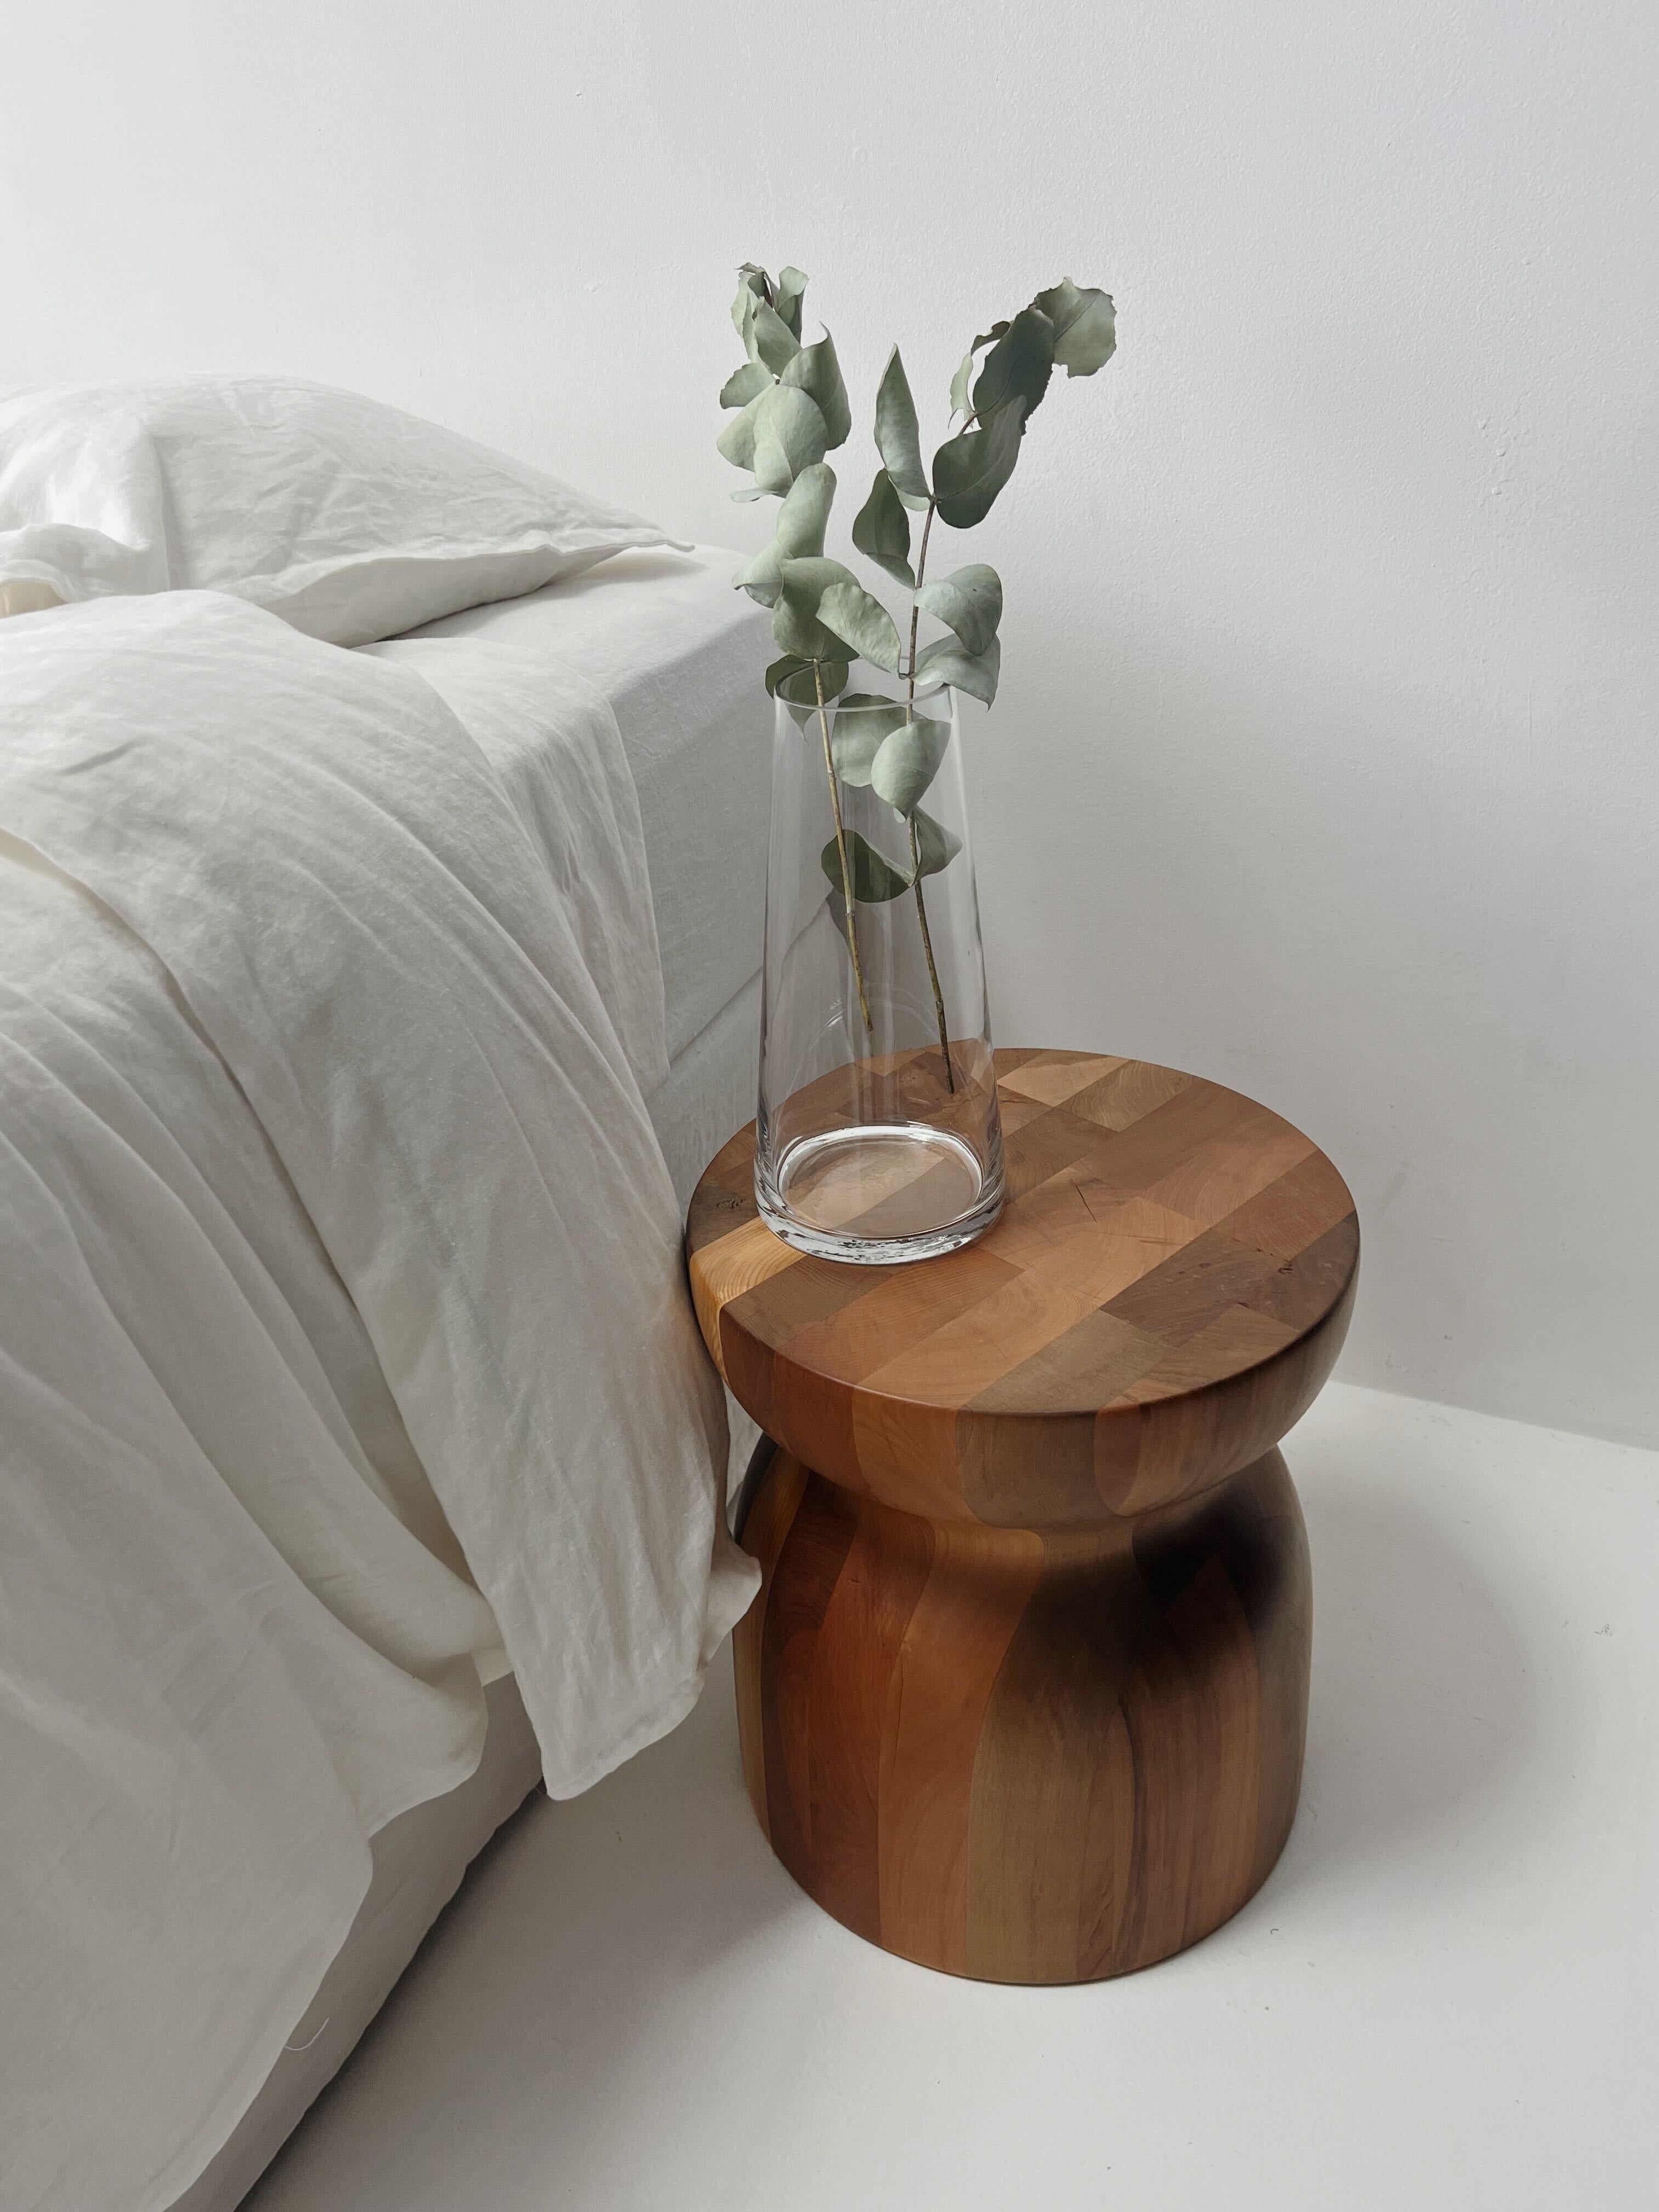 Organic Modern Sculptural Side Table in Sustainable Ancient Matai Wood In New Condition For Sale In Papanui, Christchurch